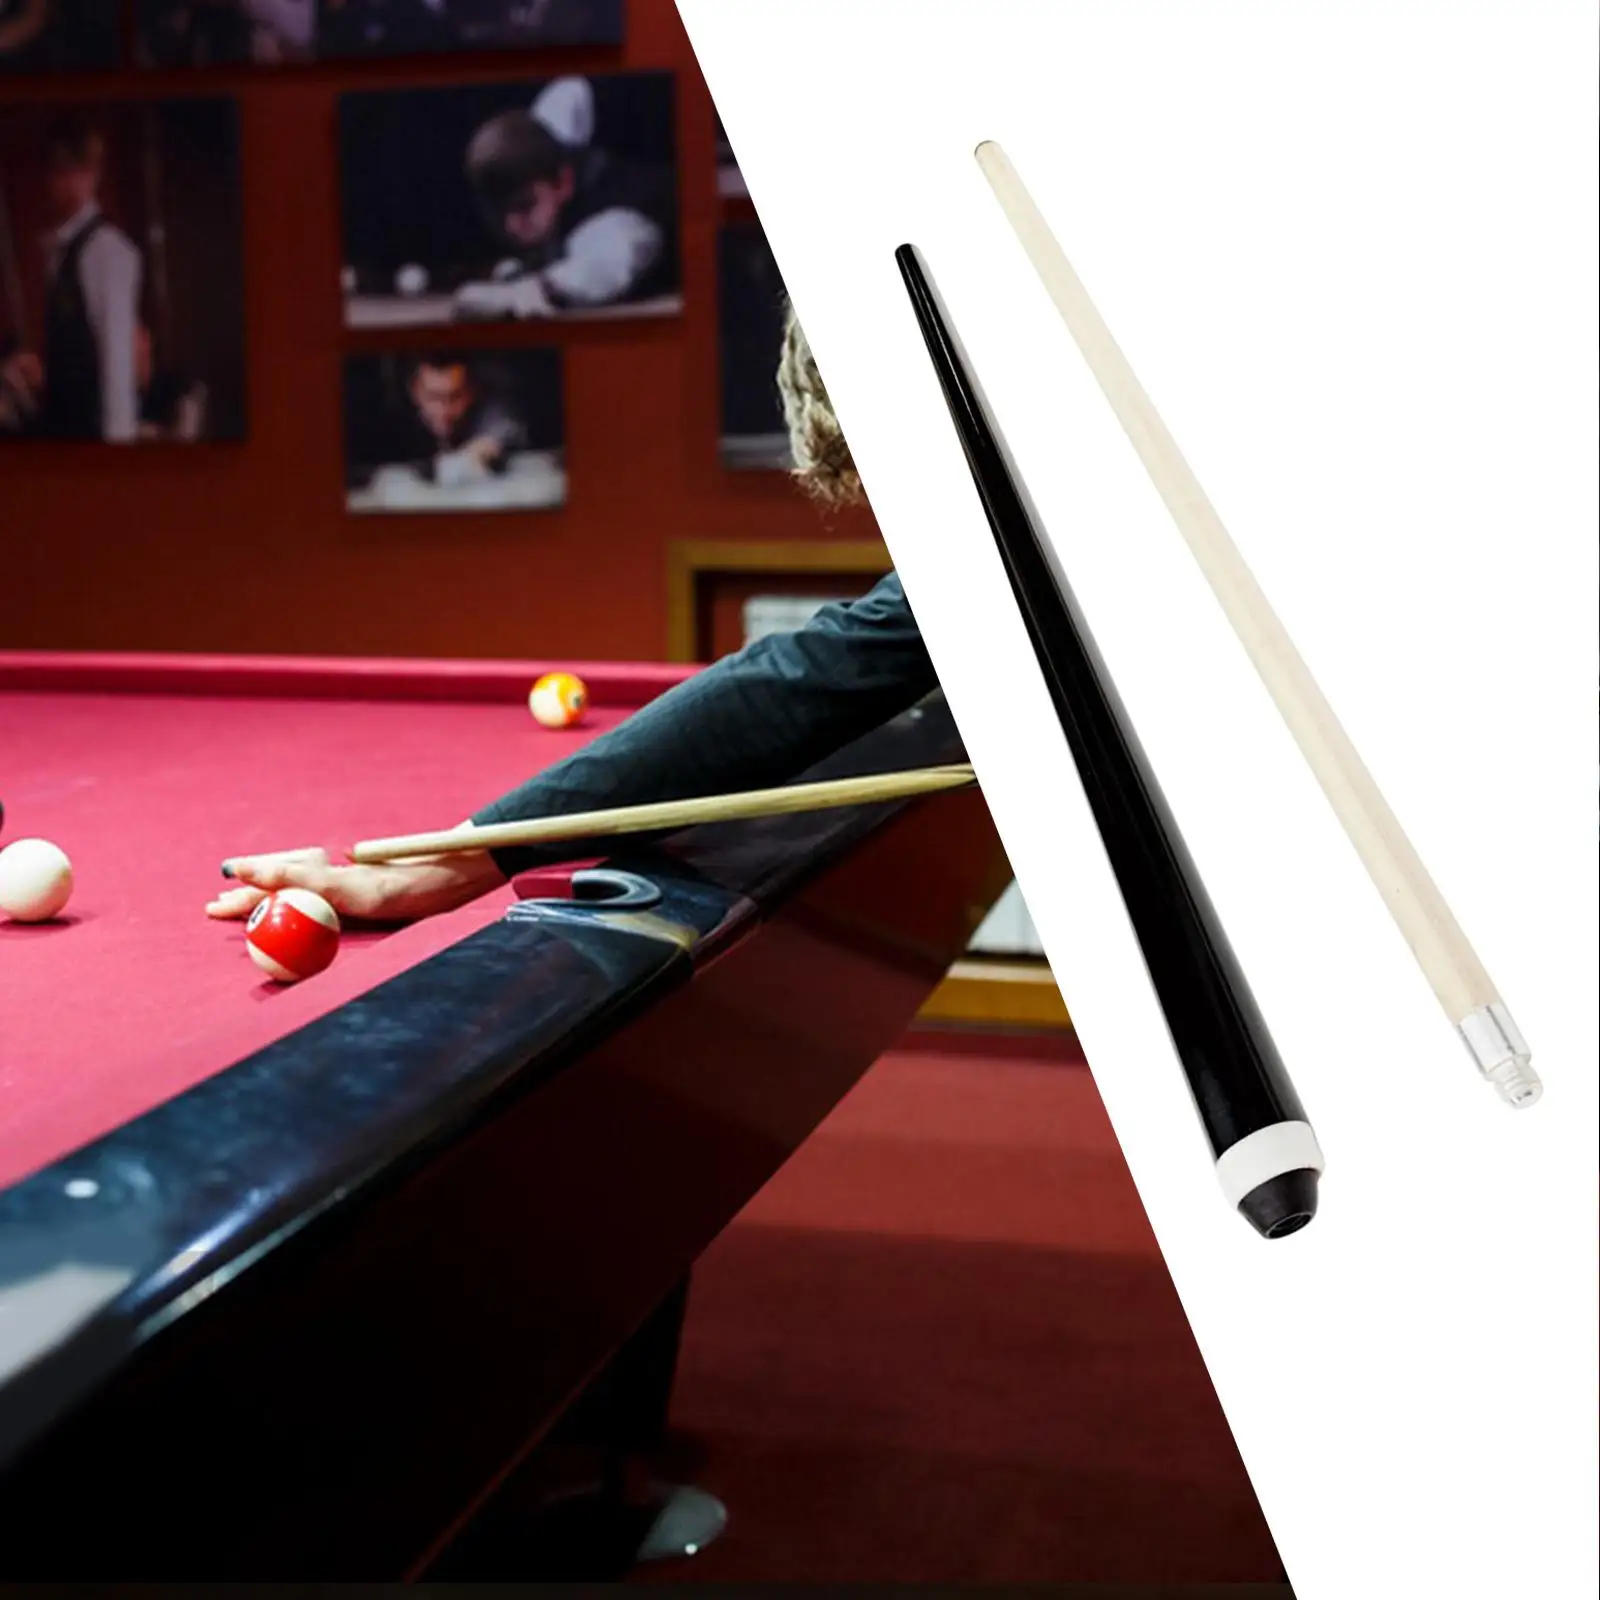 Billiard Cue Stick Wooden Pool Stick 57inch Pool Table Sticks for Snooker Billiard Table Sports Competition Practice Accessories